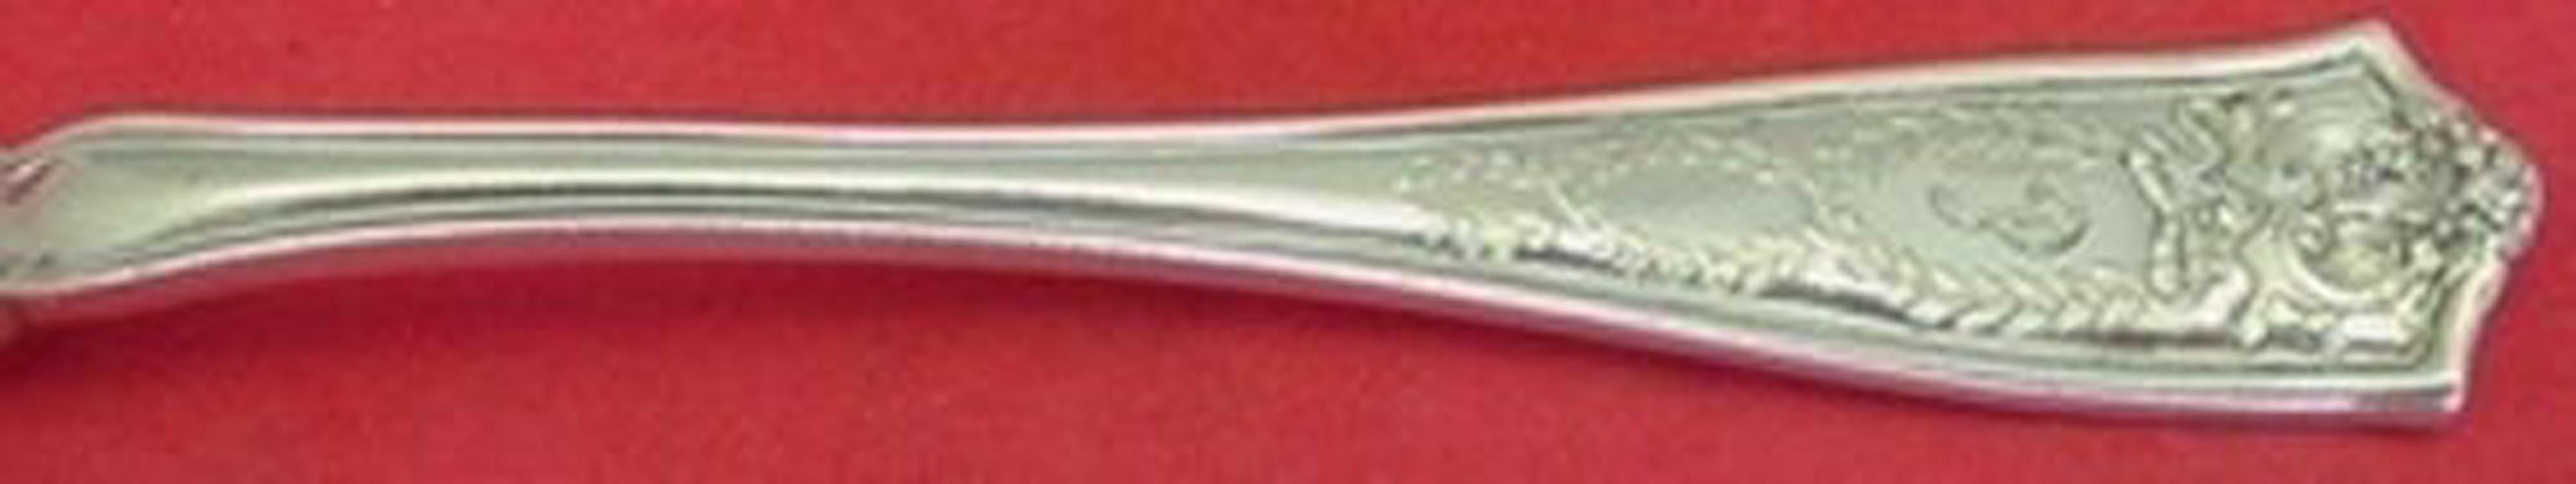 Sterling Silver Place Soup Spoon 7